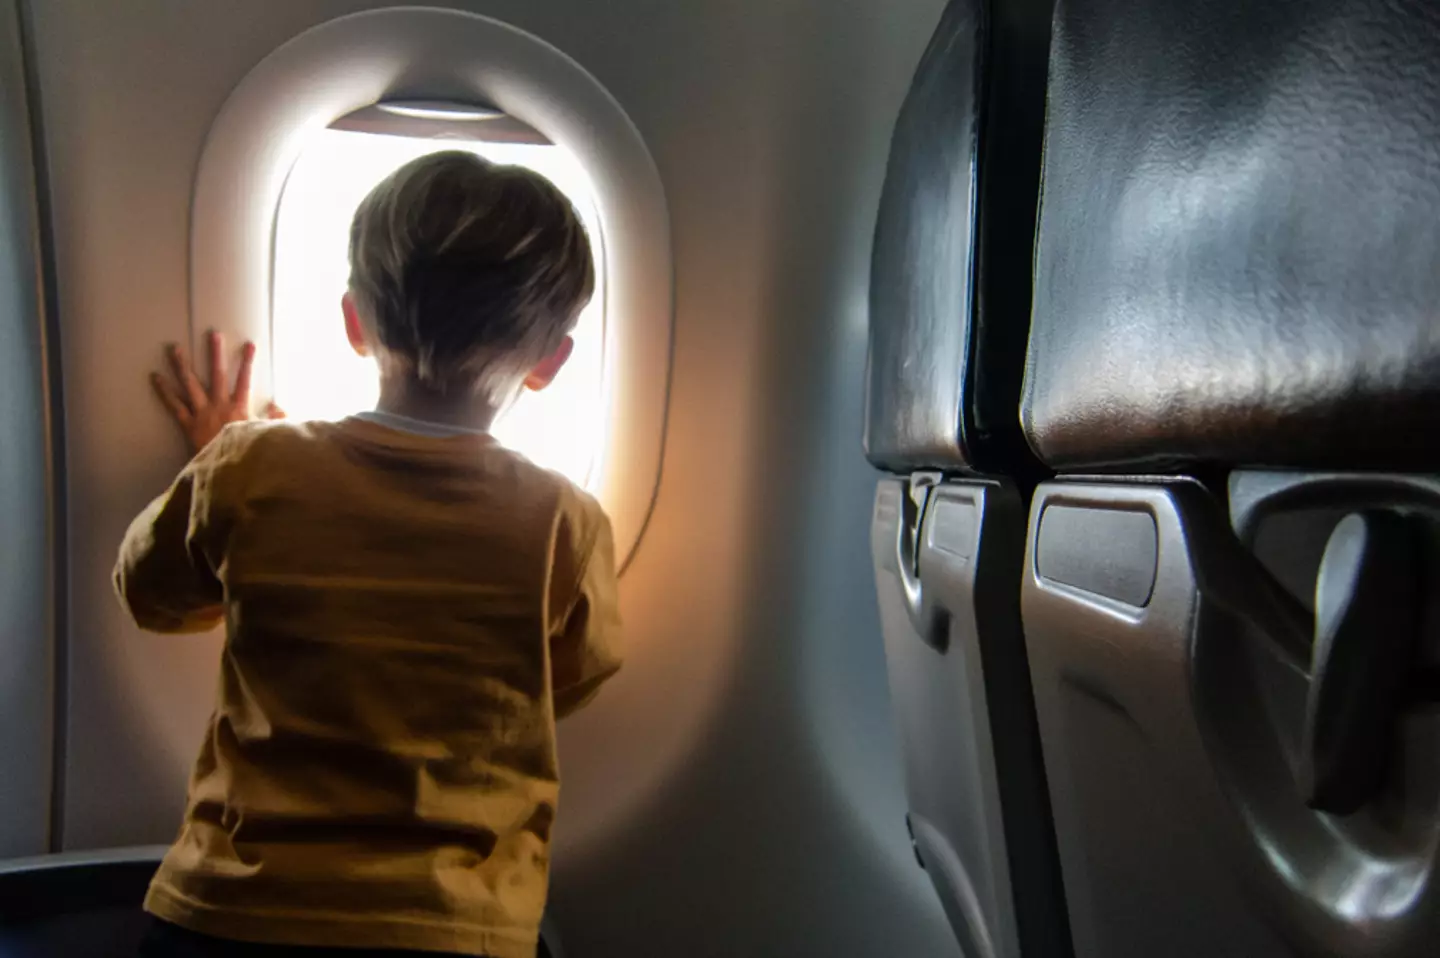 The woman refused to switch seats with a kid on the eight hour flight.